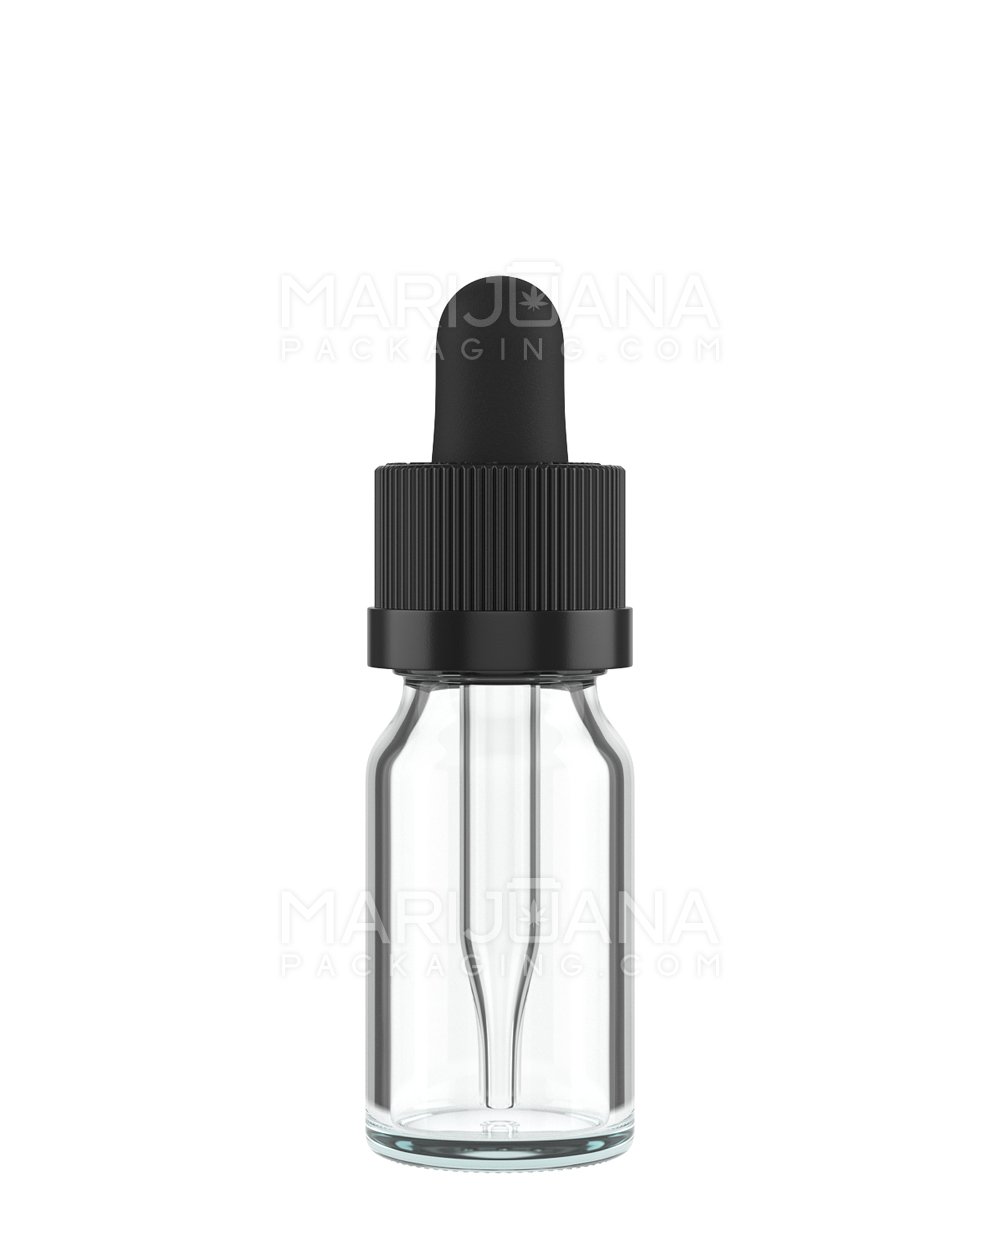 Child Resistant | Glass Tincture Bottles w/ Black Ribbed Dropper Cap | 10mL - Clear - 120 Count - 2